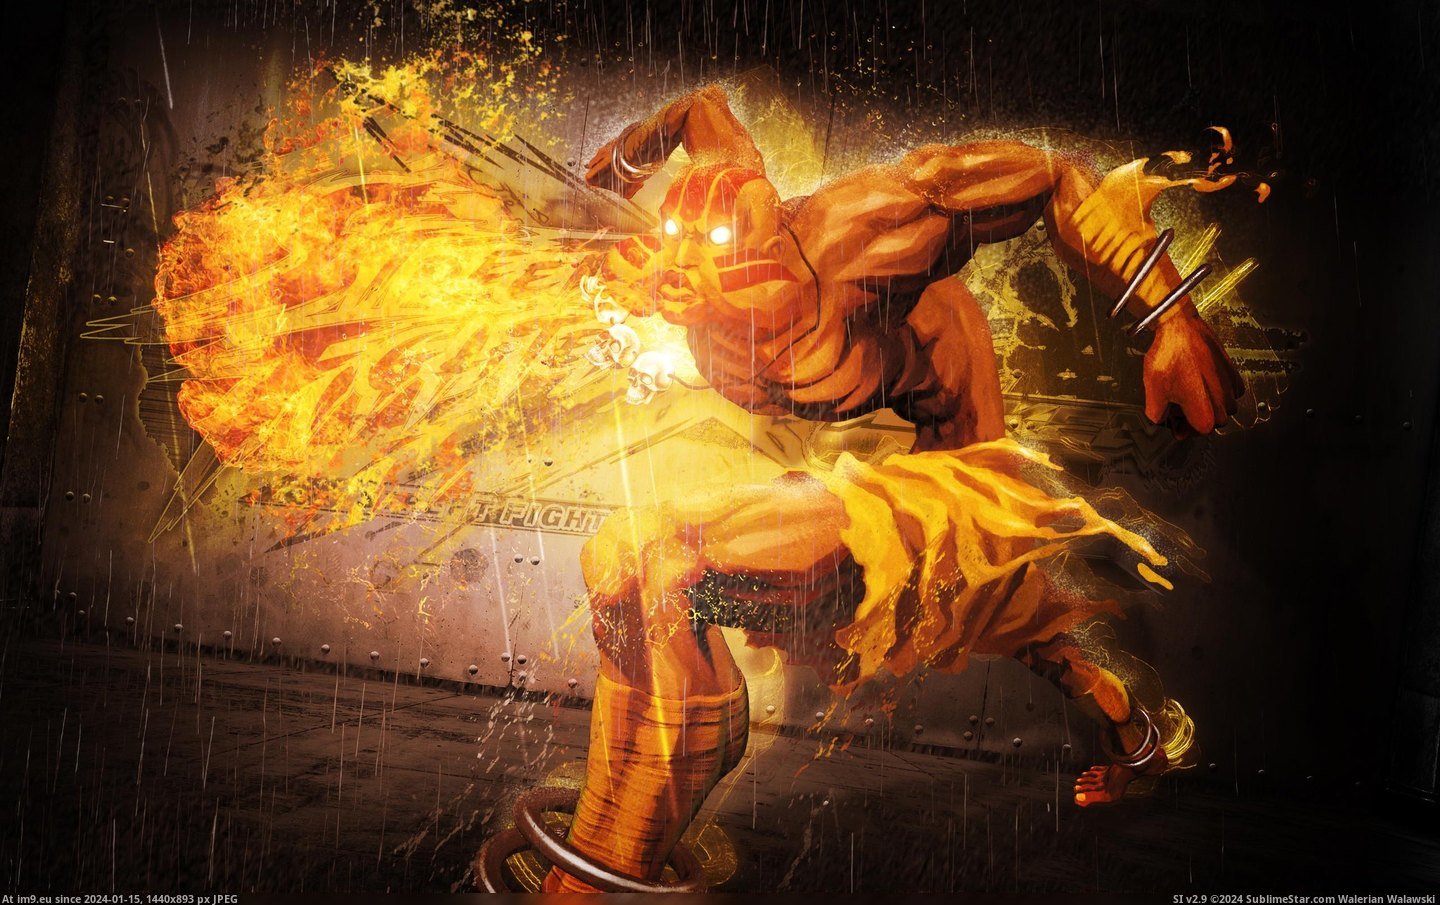 #Wallpaper #Wide #Dhalsim #Street #Fighter Dhalsim In Street Fighter Wide HD Wallpaper Pic. (Image of album Unique HD Wallpapers))